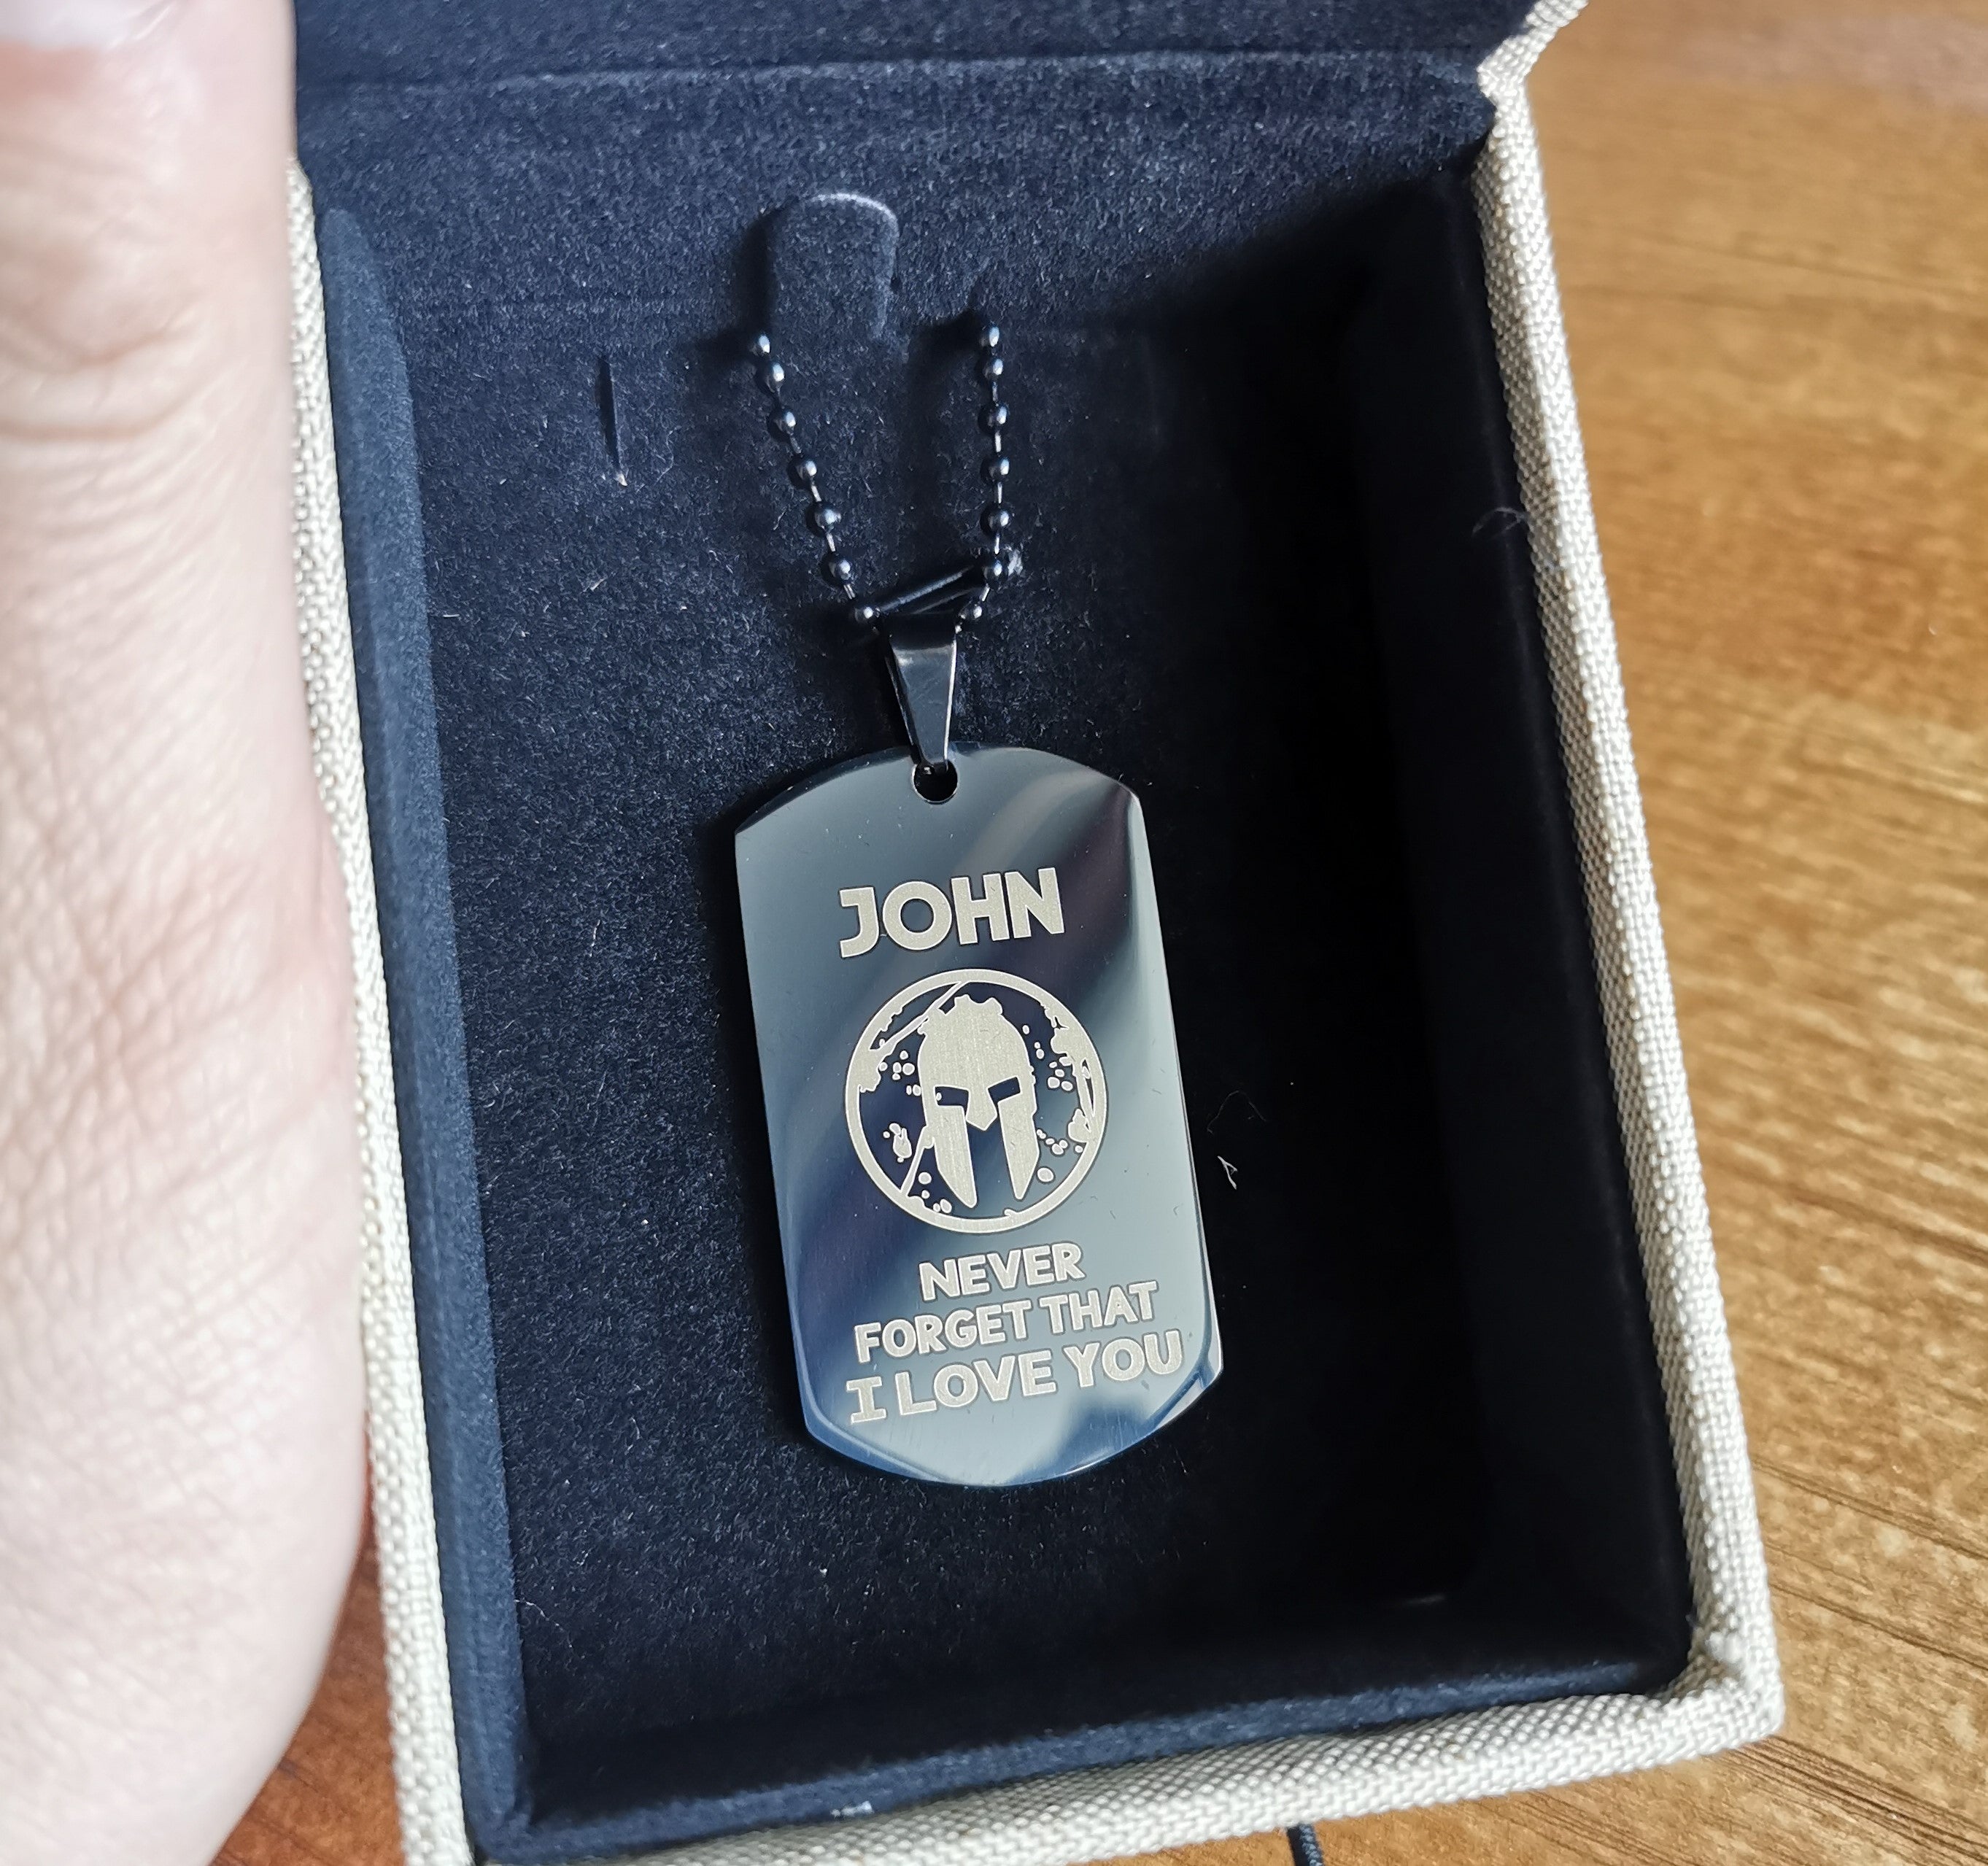 Firefighter and soldier one sided engraved dog tag call on me brother gift for your brother